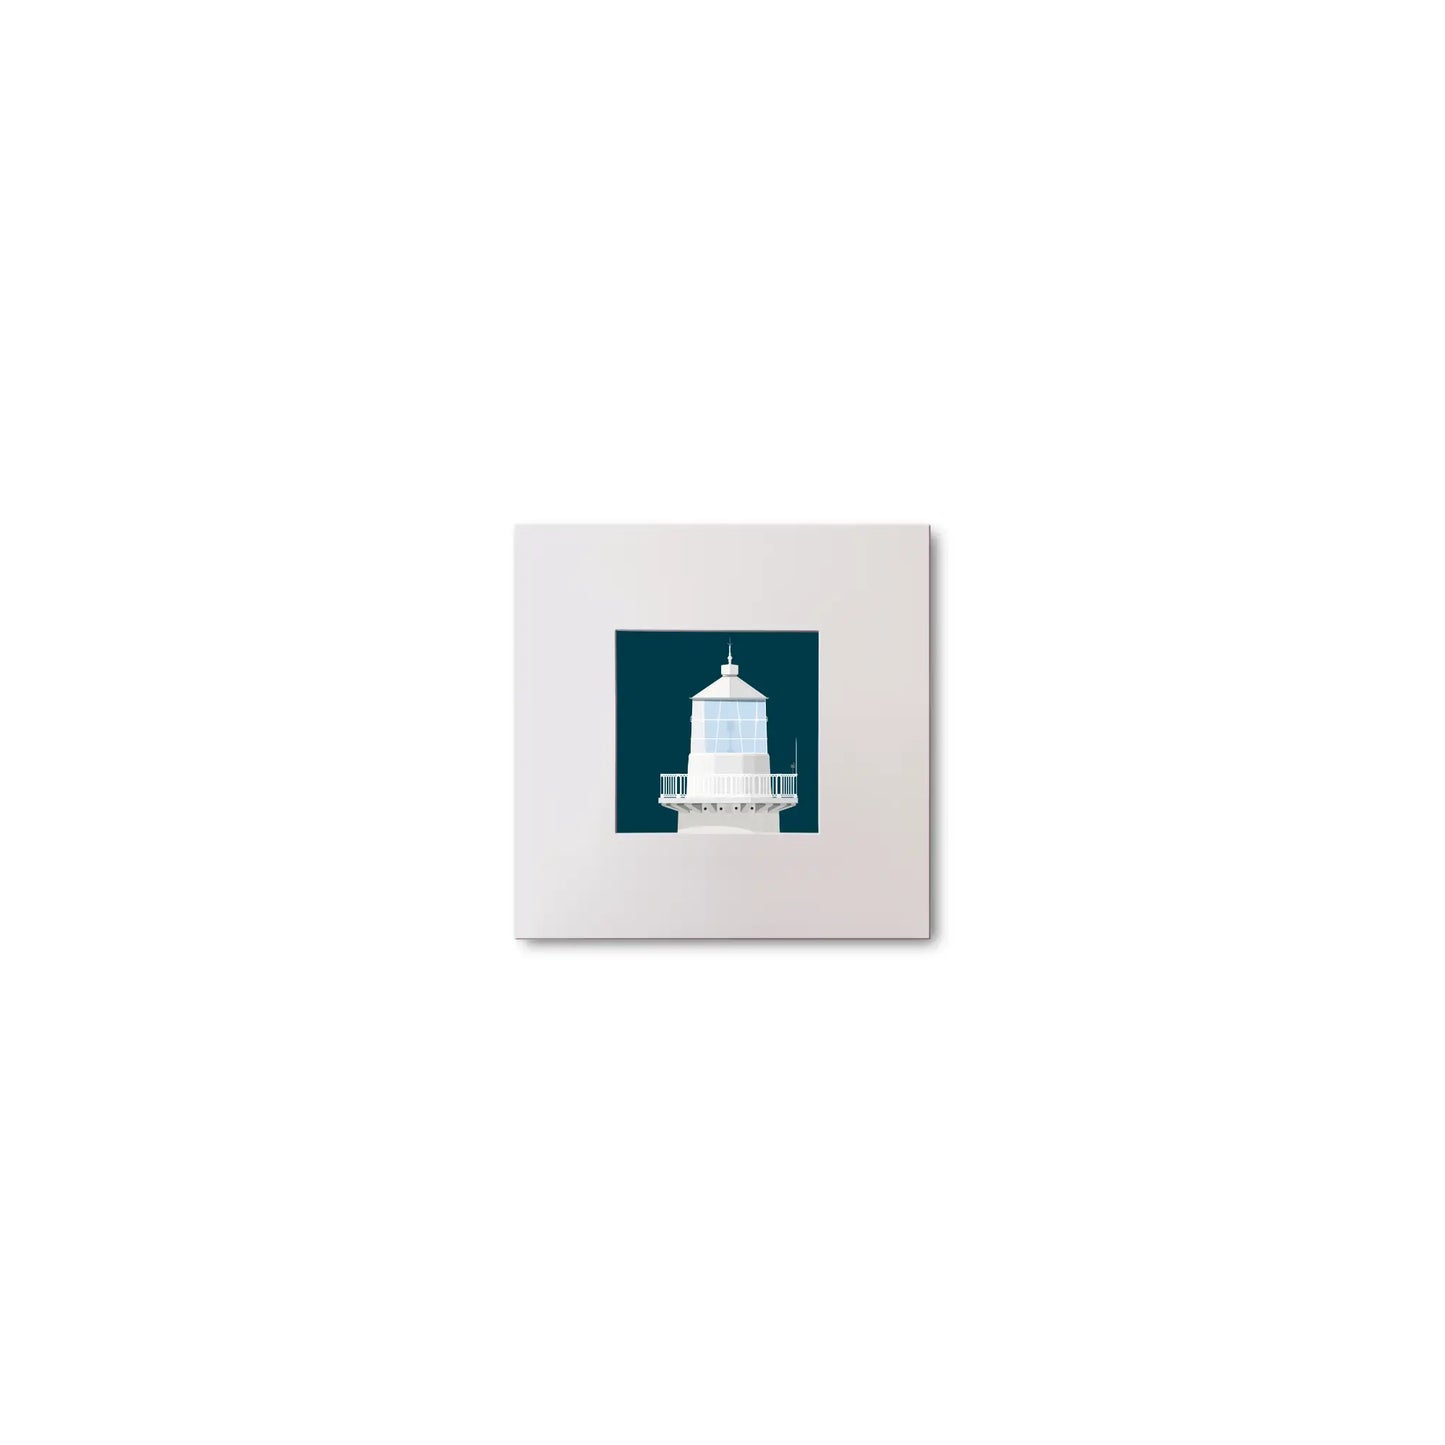 Illustration Eeragh lighthouse on a midnight blue background, mounted and measuring 10x10cm.